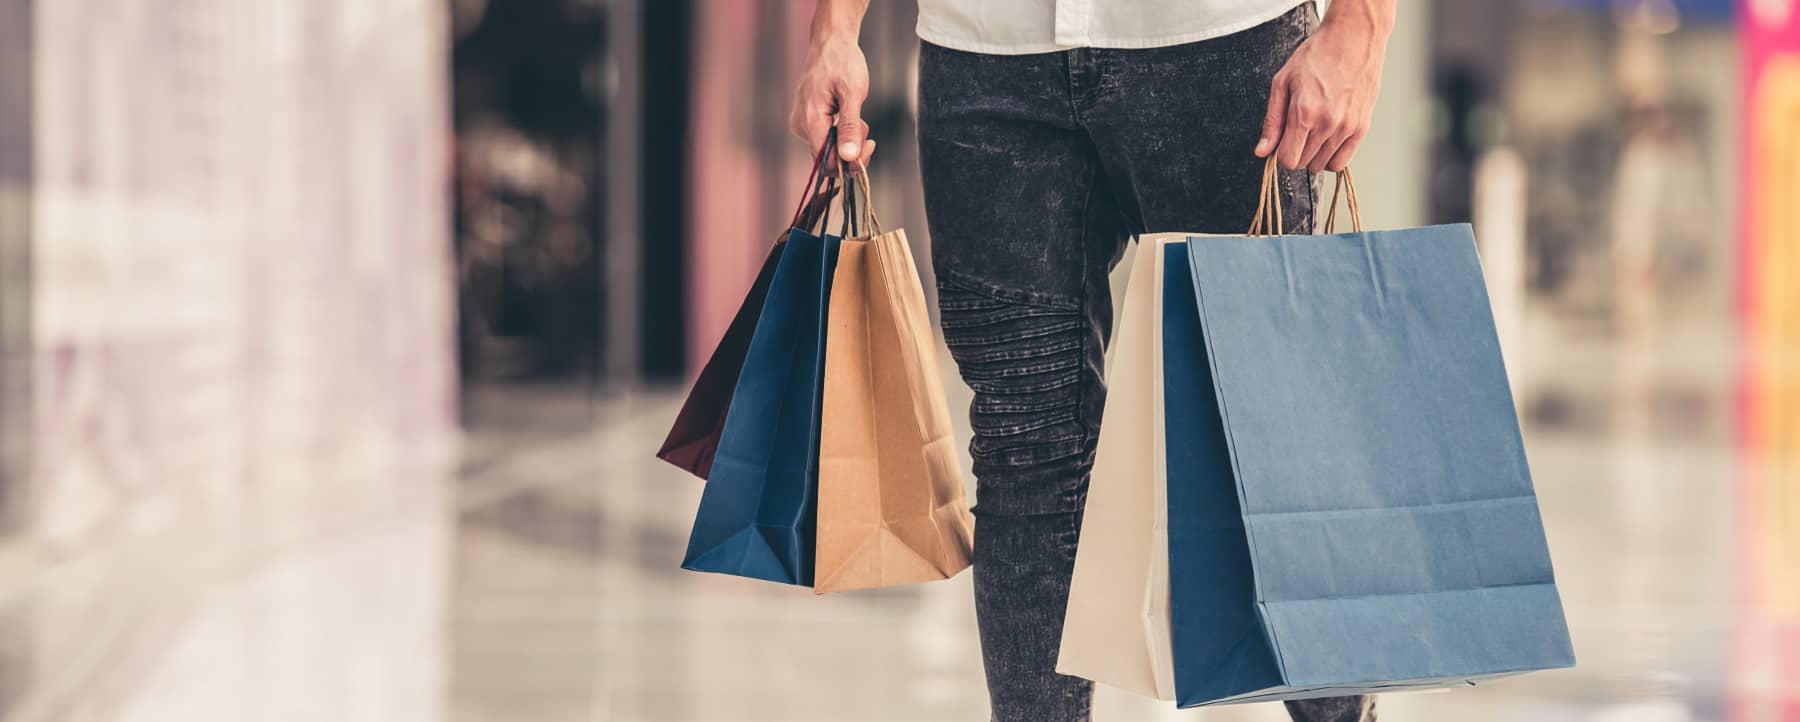 4 Shopper Marketing Examples to Inspire your Next Campaign